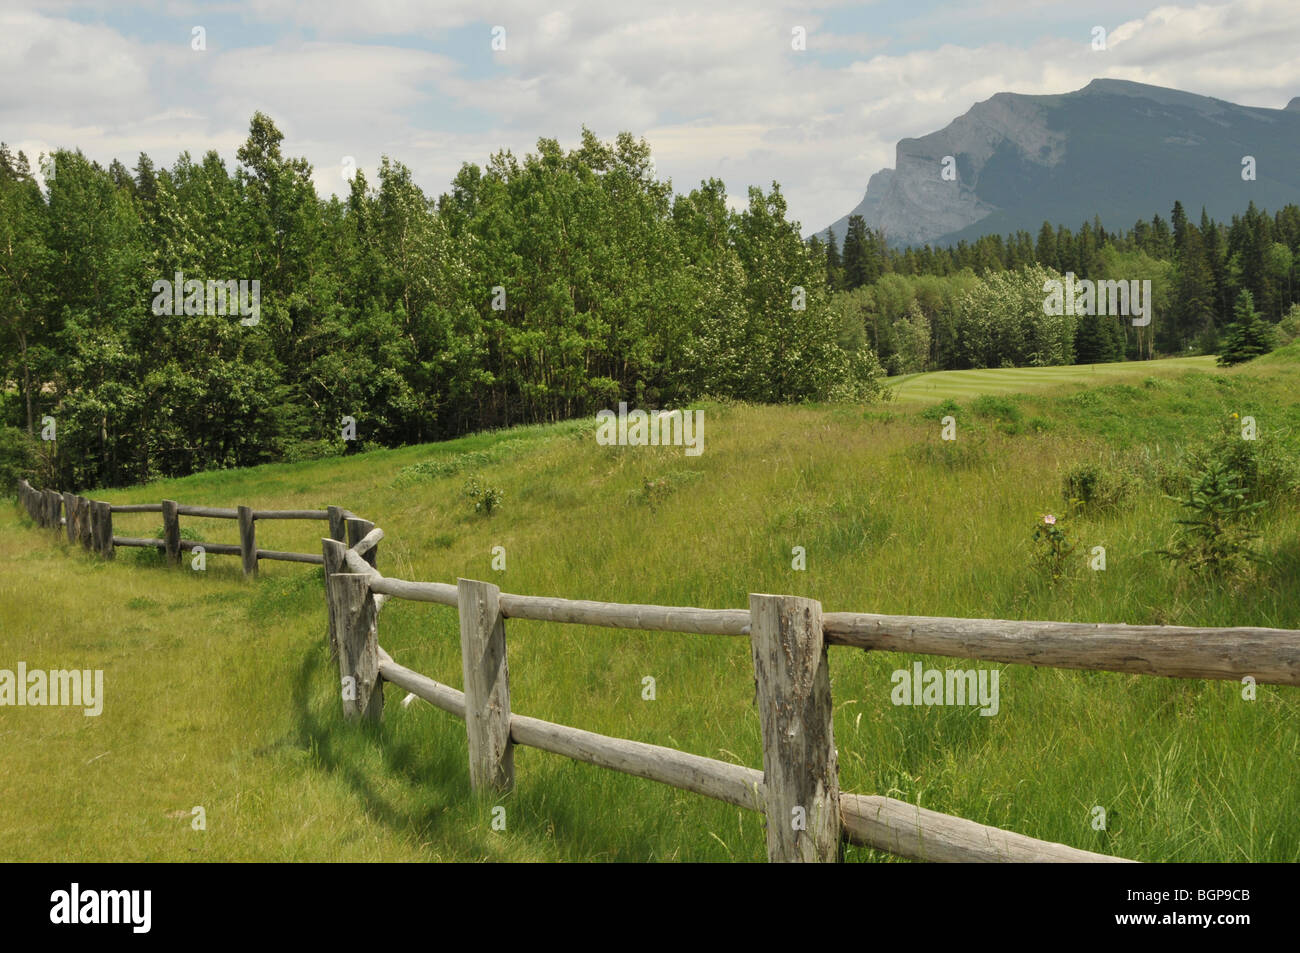 Rural fence, Canmore, Alberta, Canada Stock Photo